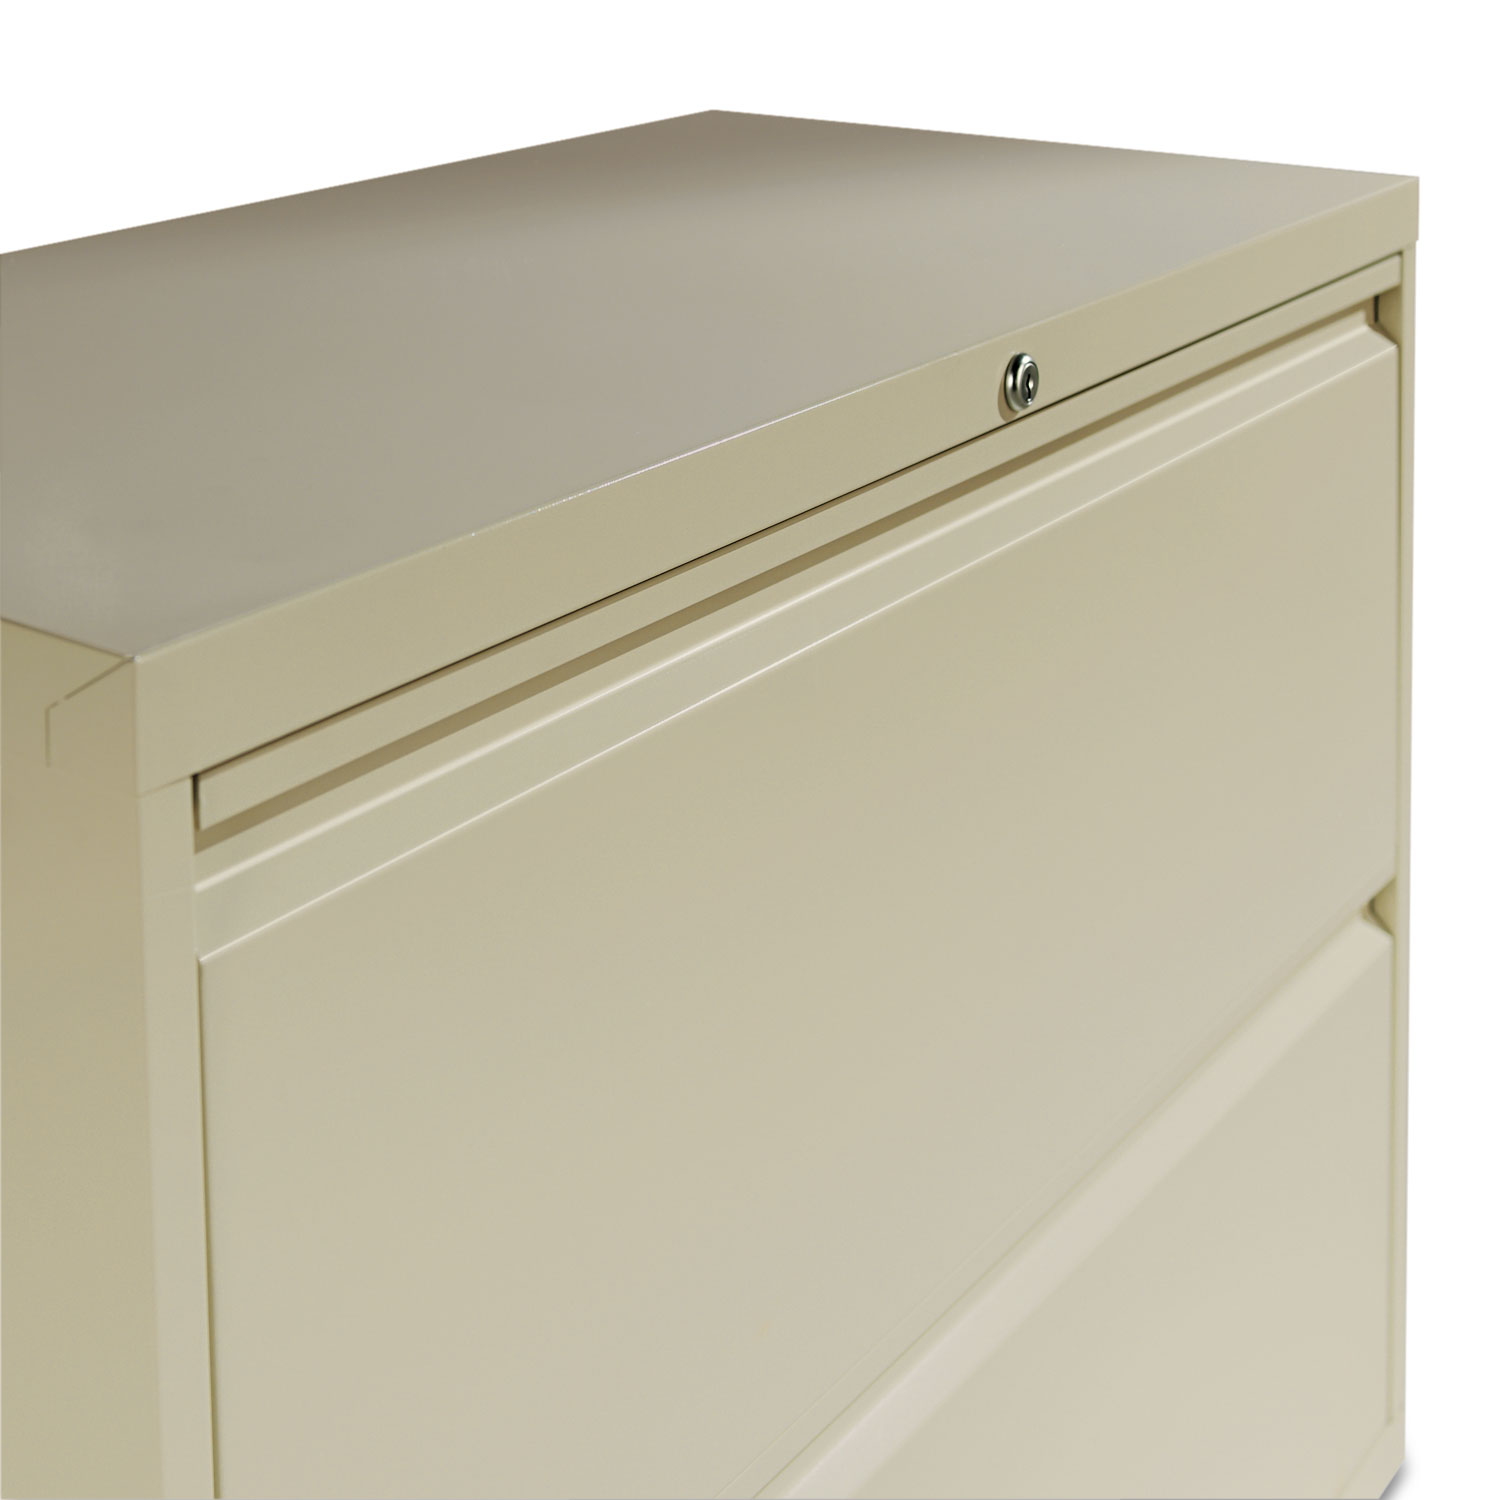 Four-Drawer Lateral File Cabinet, 30w x 19-1/4d x 53-1/4h, Putty